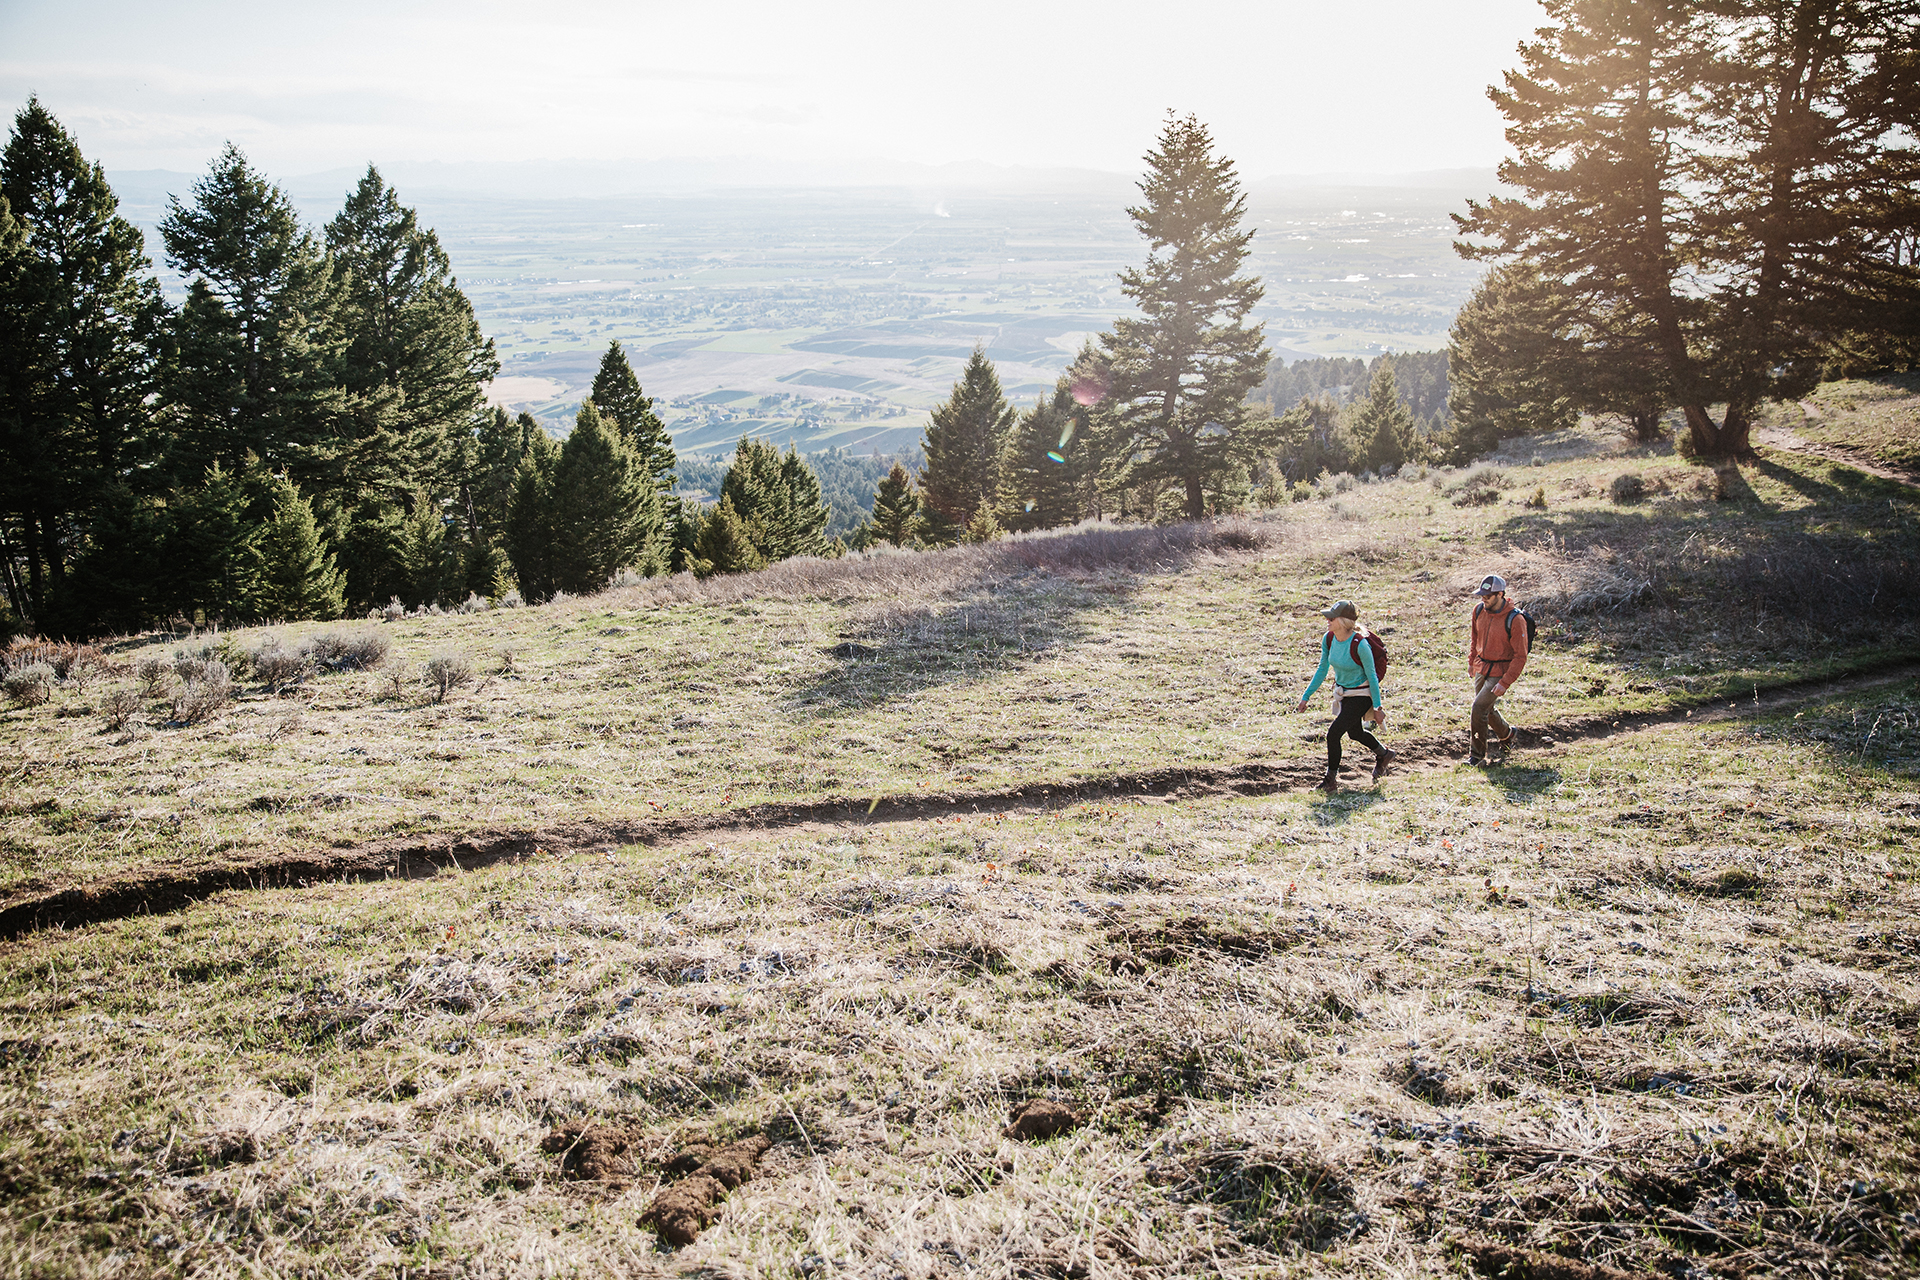 Two hikers trekking through the mountains on a trail in Montana.